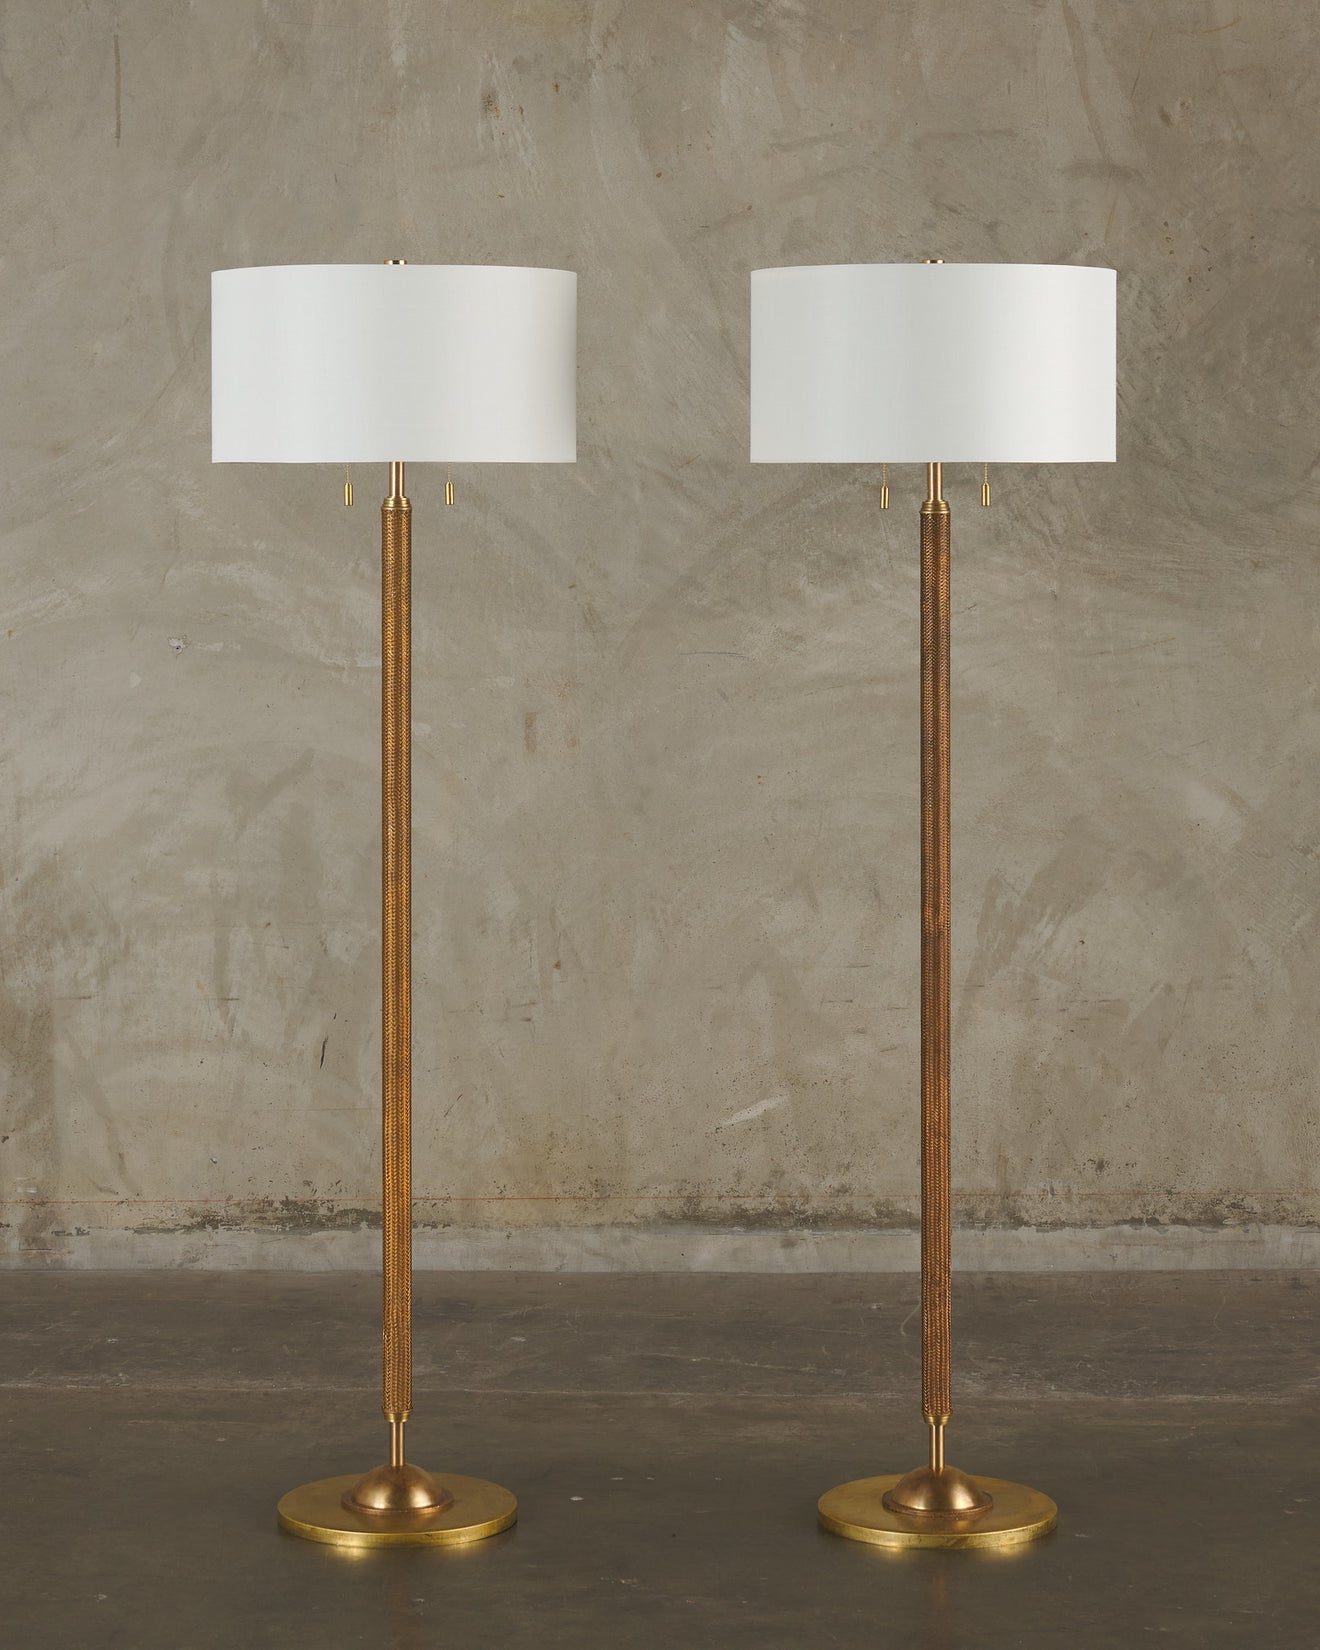 PAIR OF SNAKE SKIN STANDING LAMPS BY GIANNI VALLINO